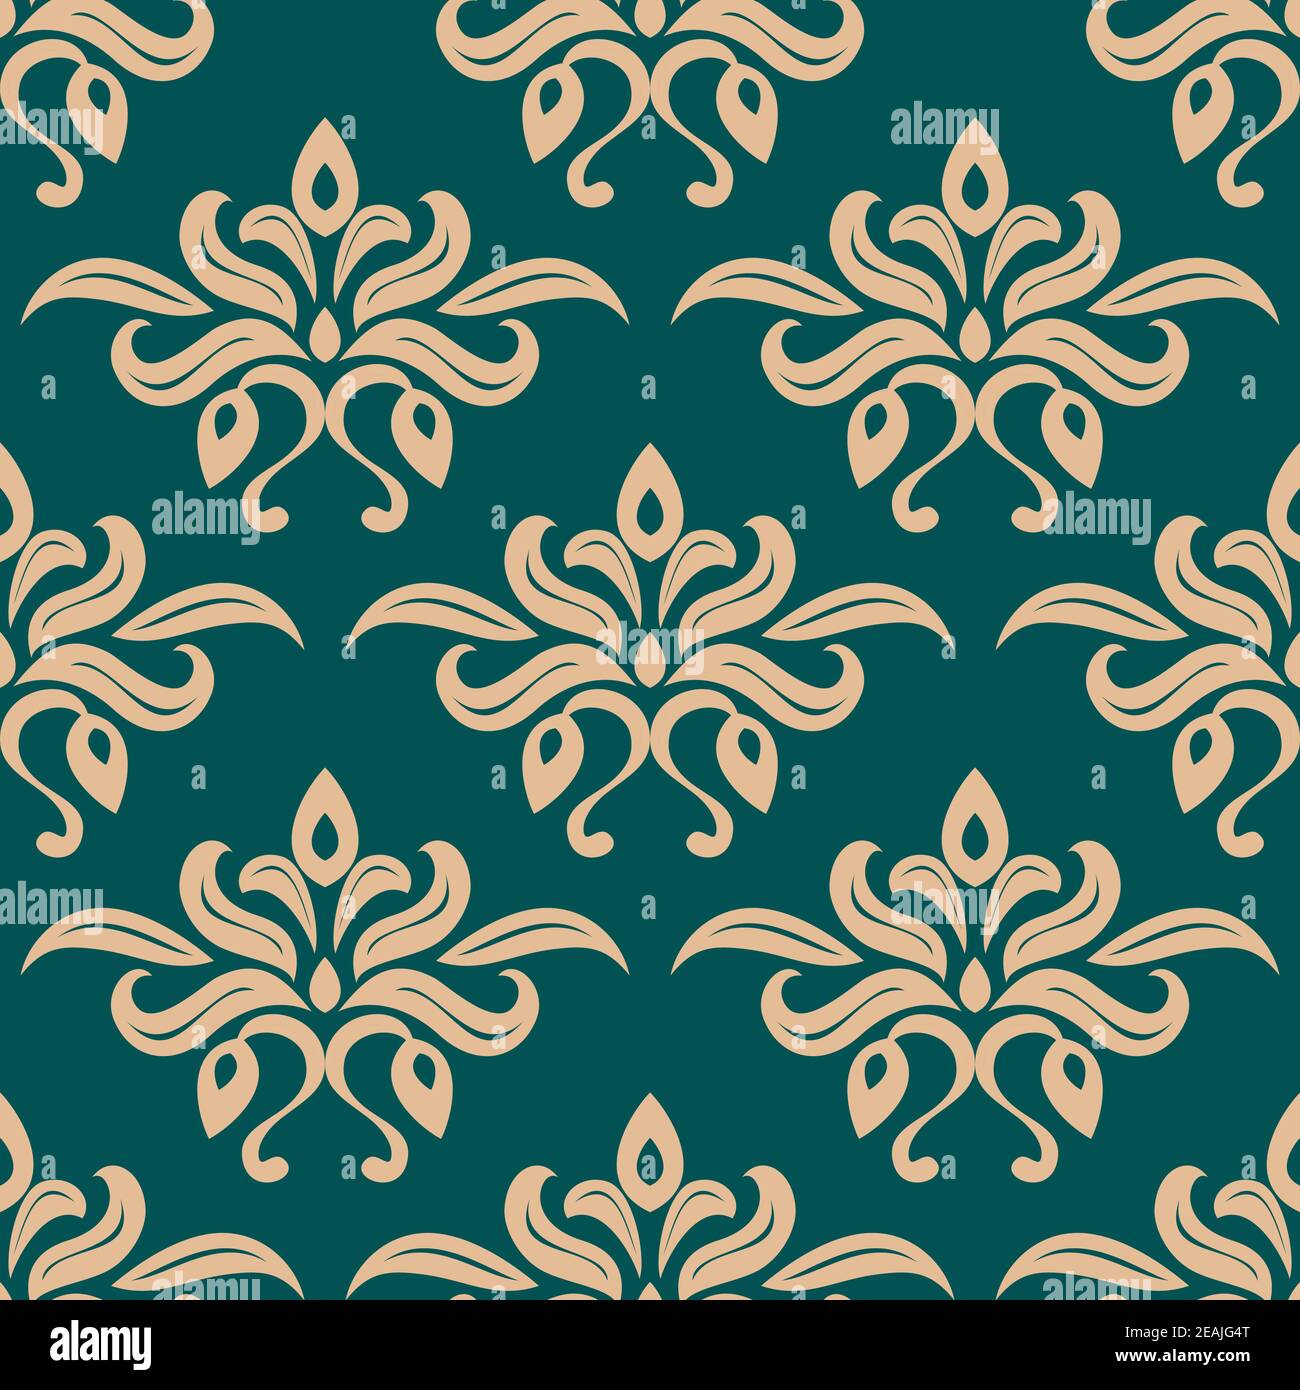 Abstract seamless pattern in square format with stylized bronze tulips bouquets on viridian background for wallpaper or fabric design Stock Vector